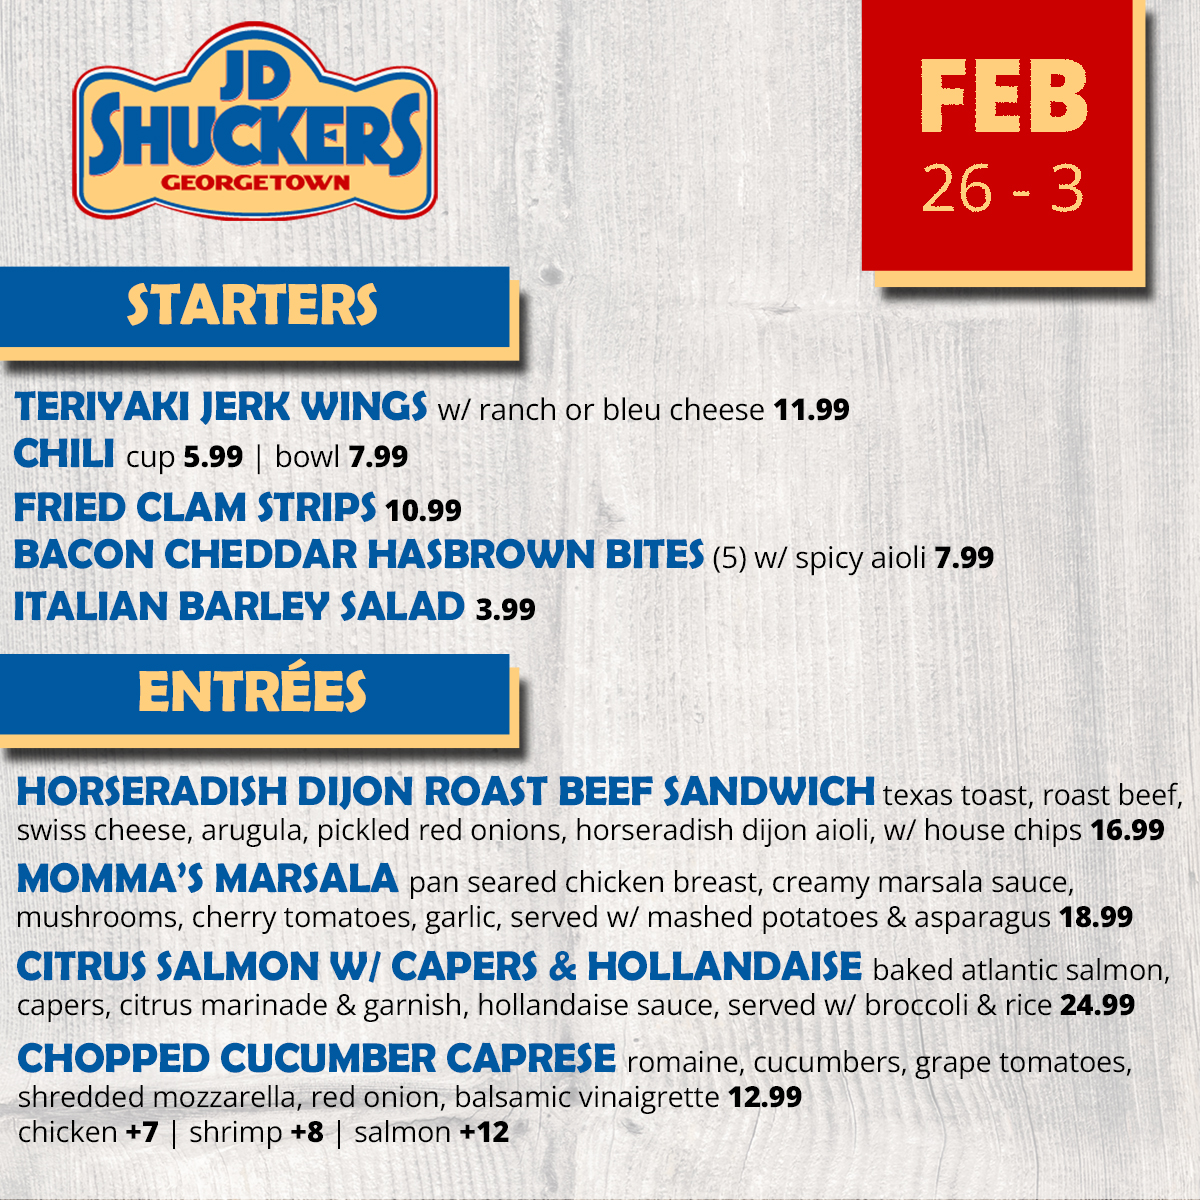 Weekly Specials at JD Shuckers Georgetown